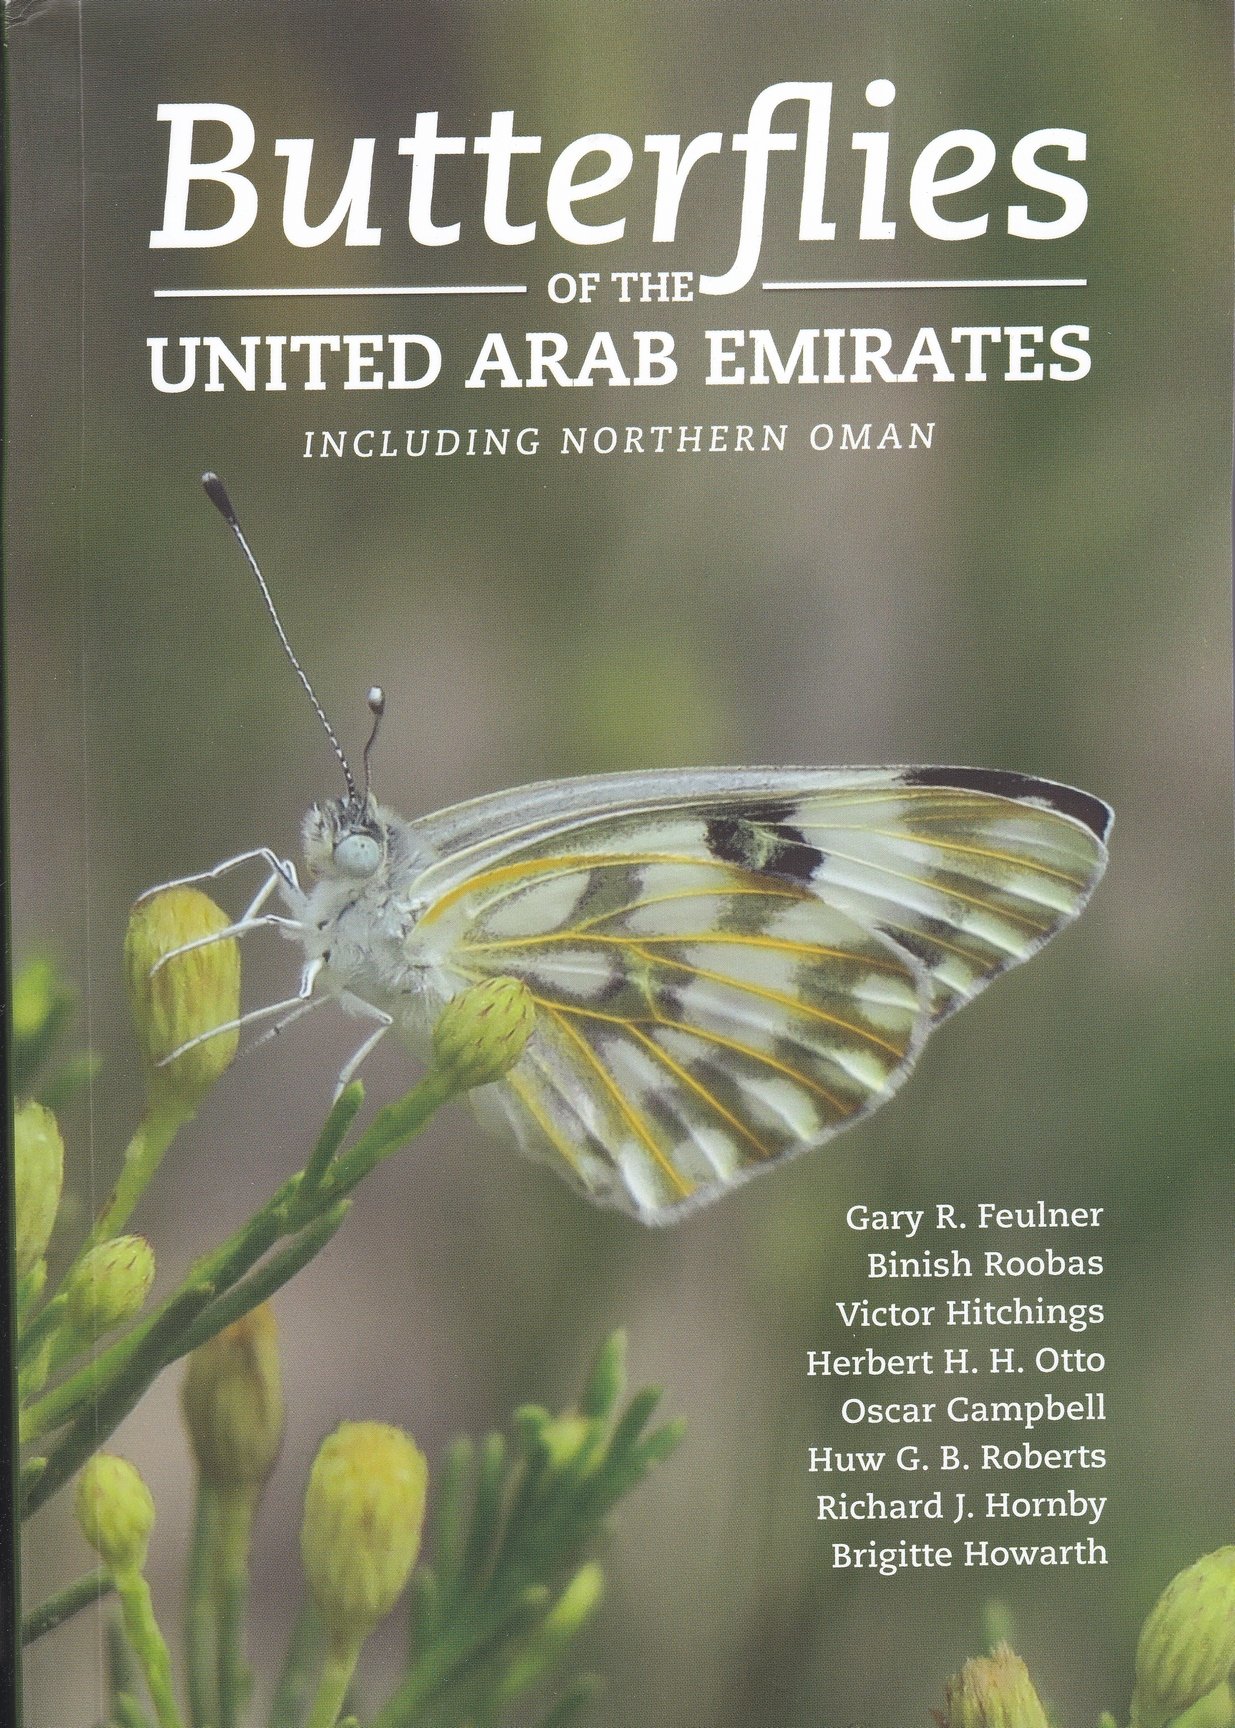 Butterflies of the United Arab Emirates including Northern Oman (Rippl-Rónai Múzeum CC BY-NC-ND)